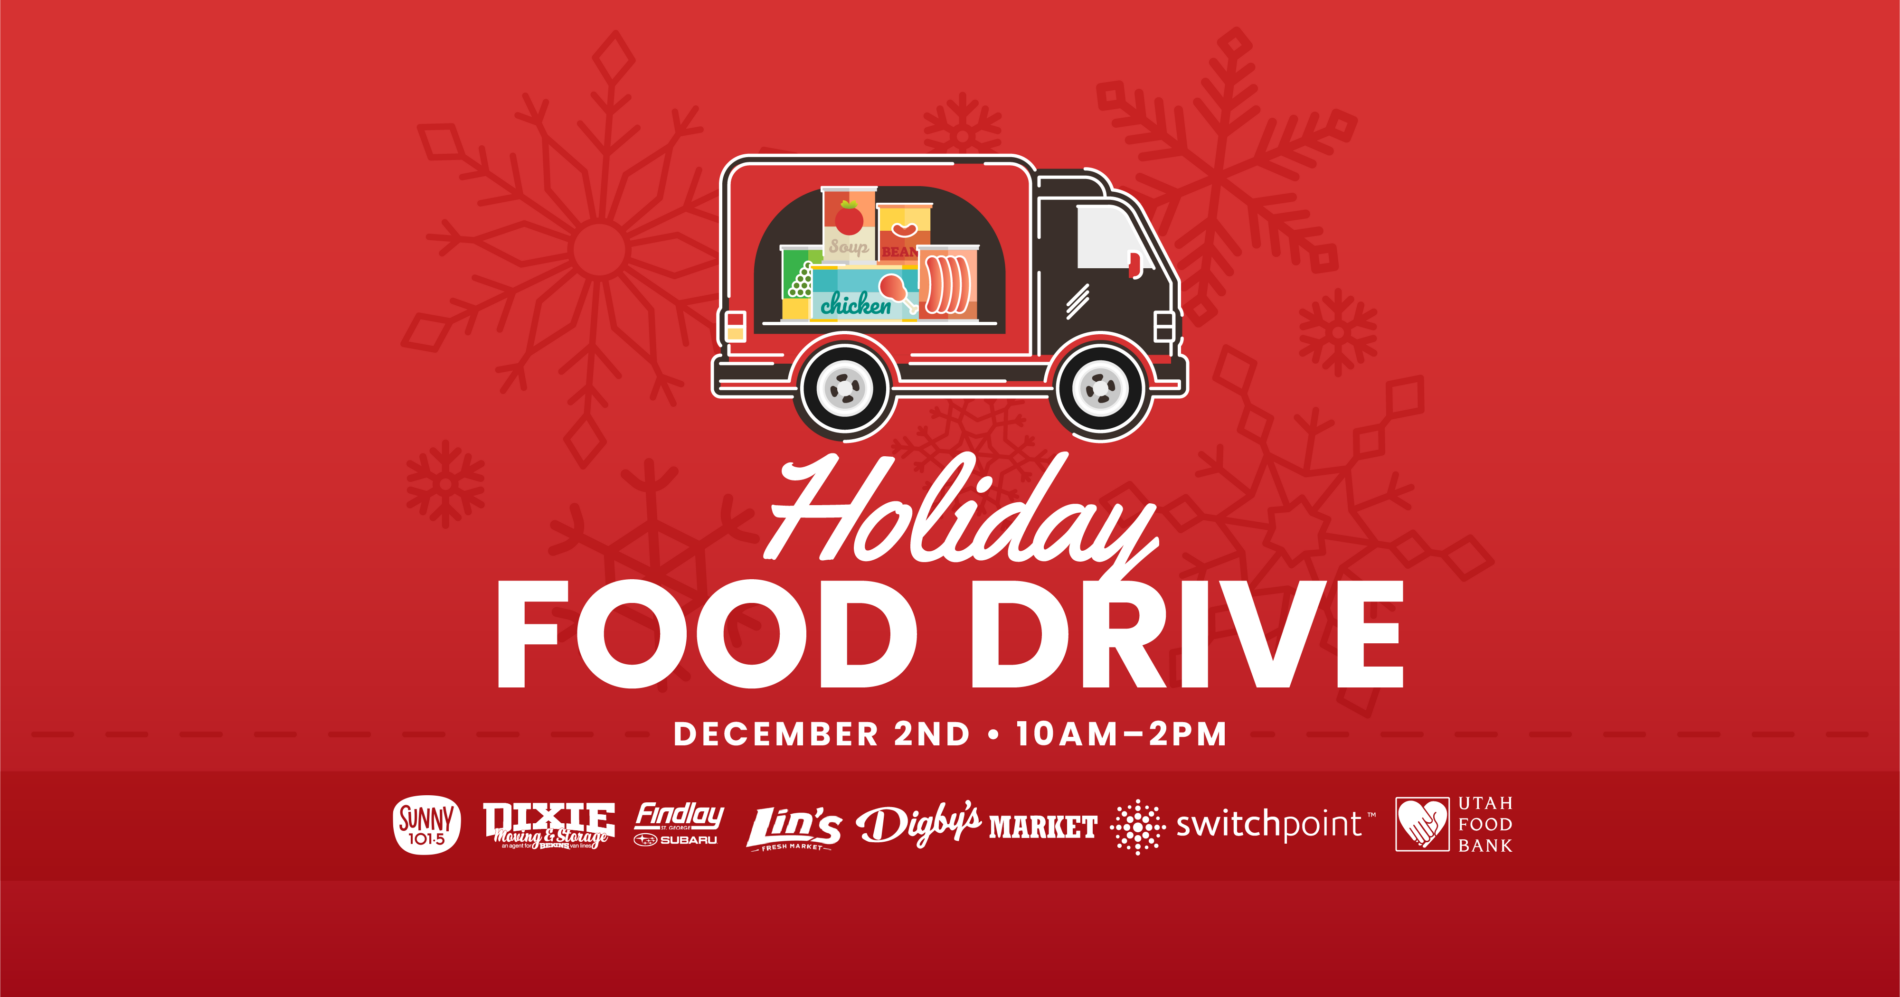 Sunny 101.5 Holiday Food Drive on December 2nd